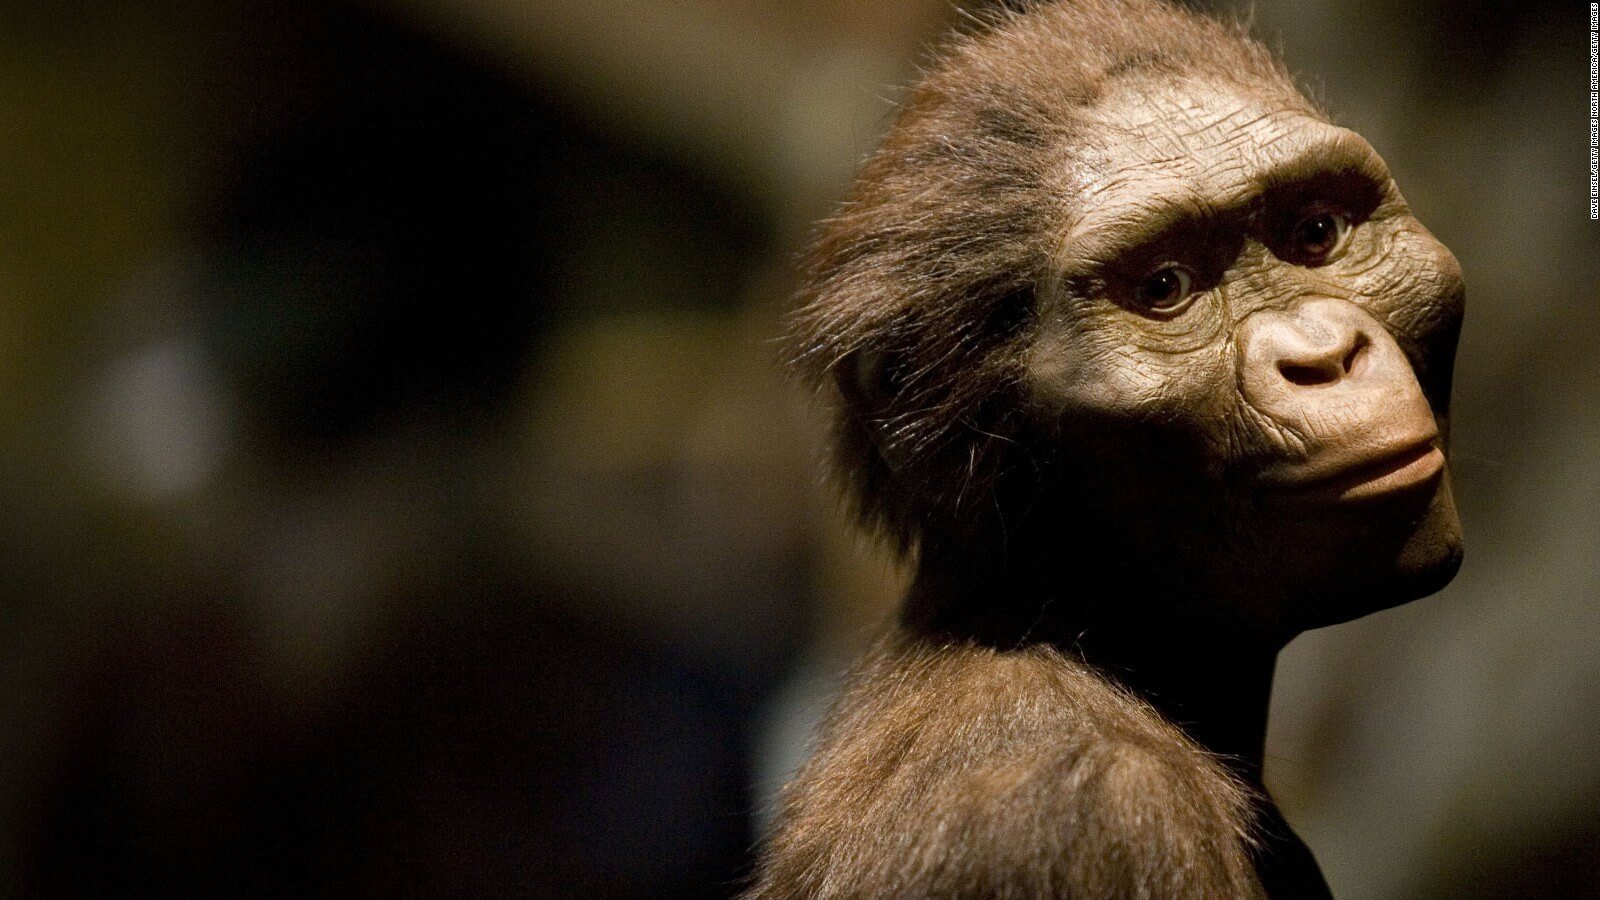 Did man descend from apes?